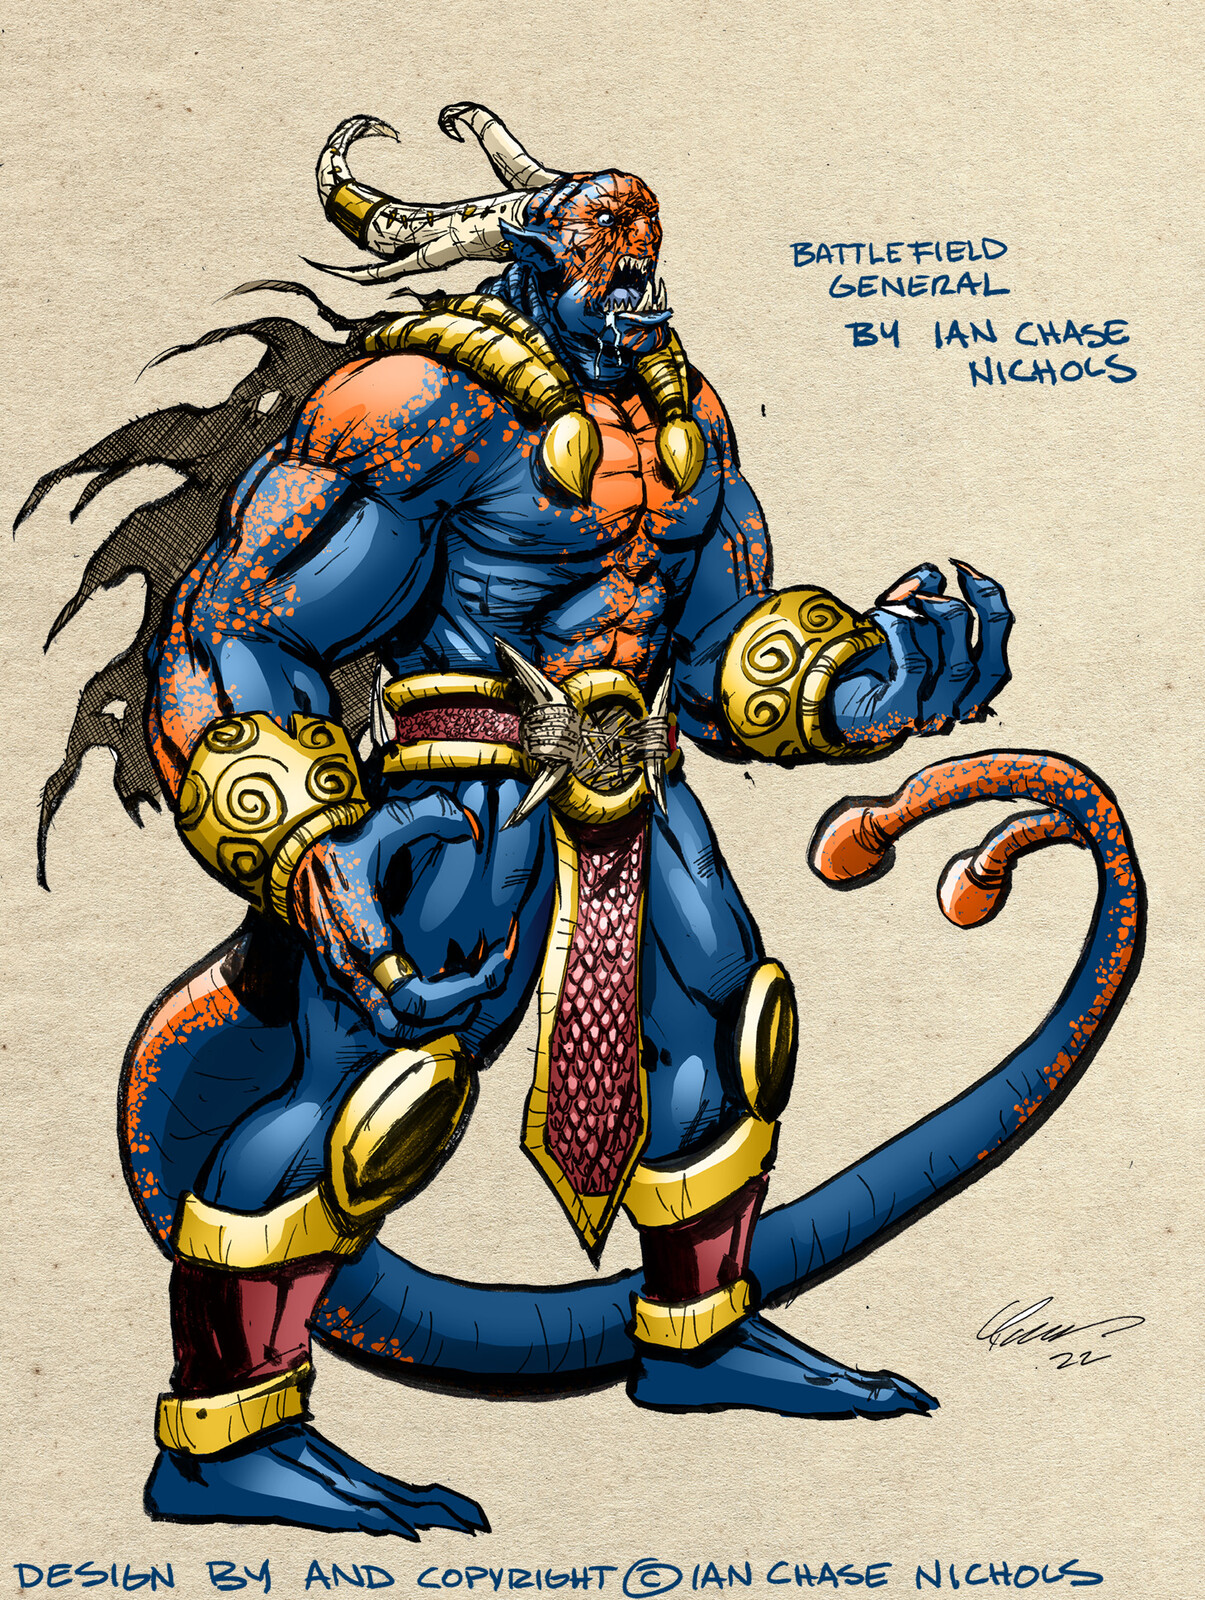 Sometimes it's just fun to draw a large monster-warrior with a twinge of vanity.
© Ian Chase Nichols